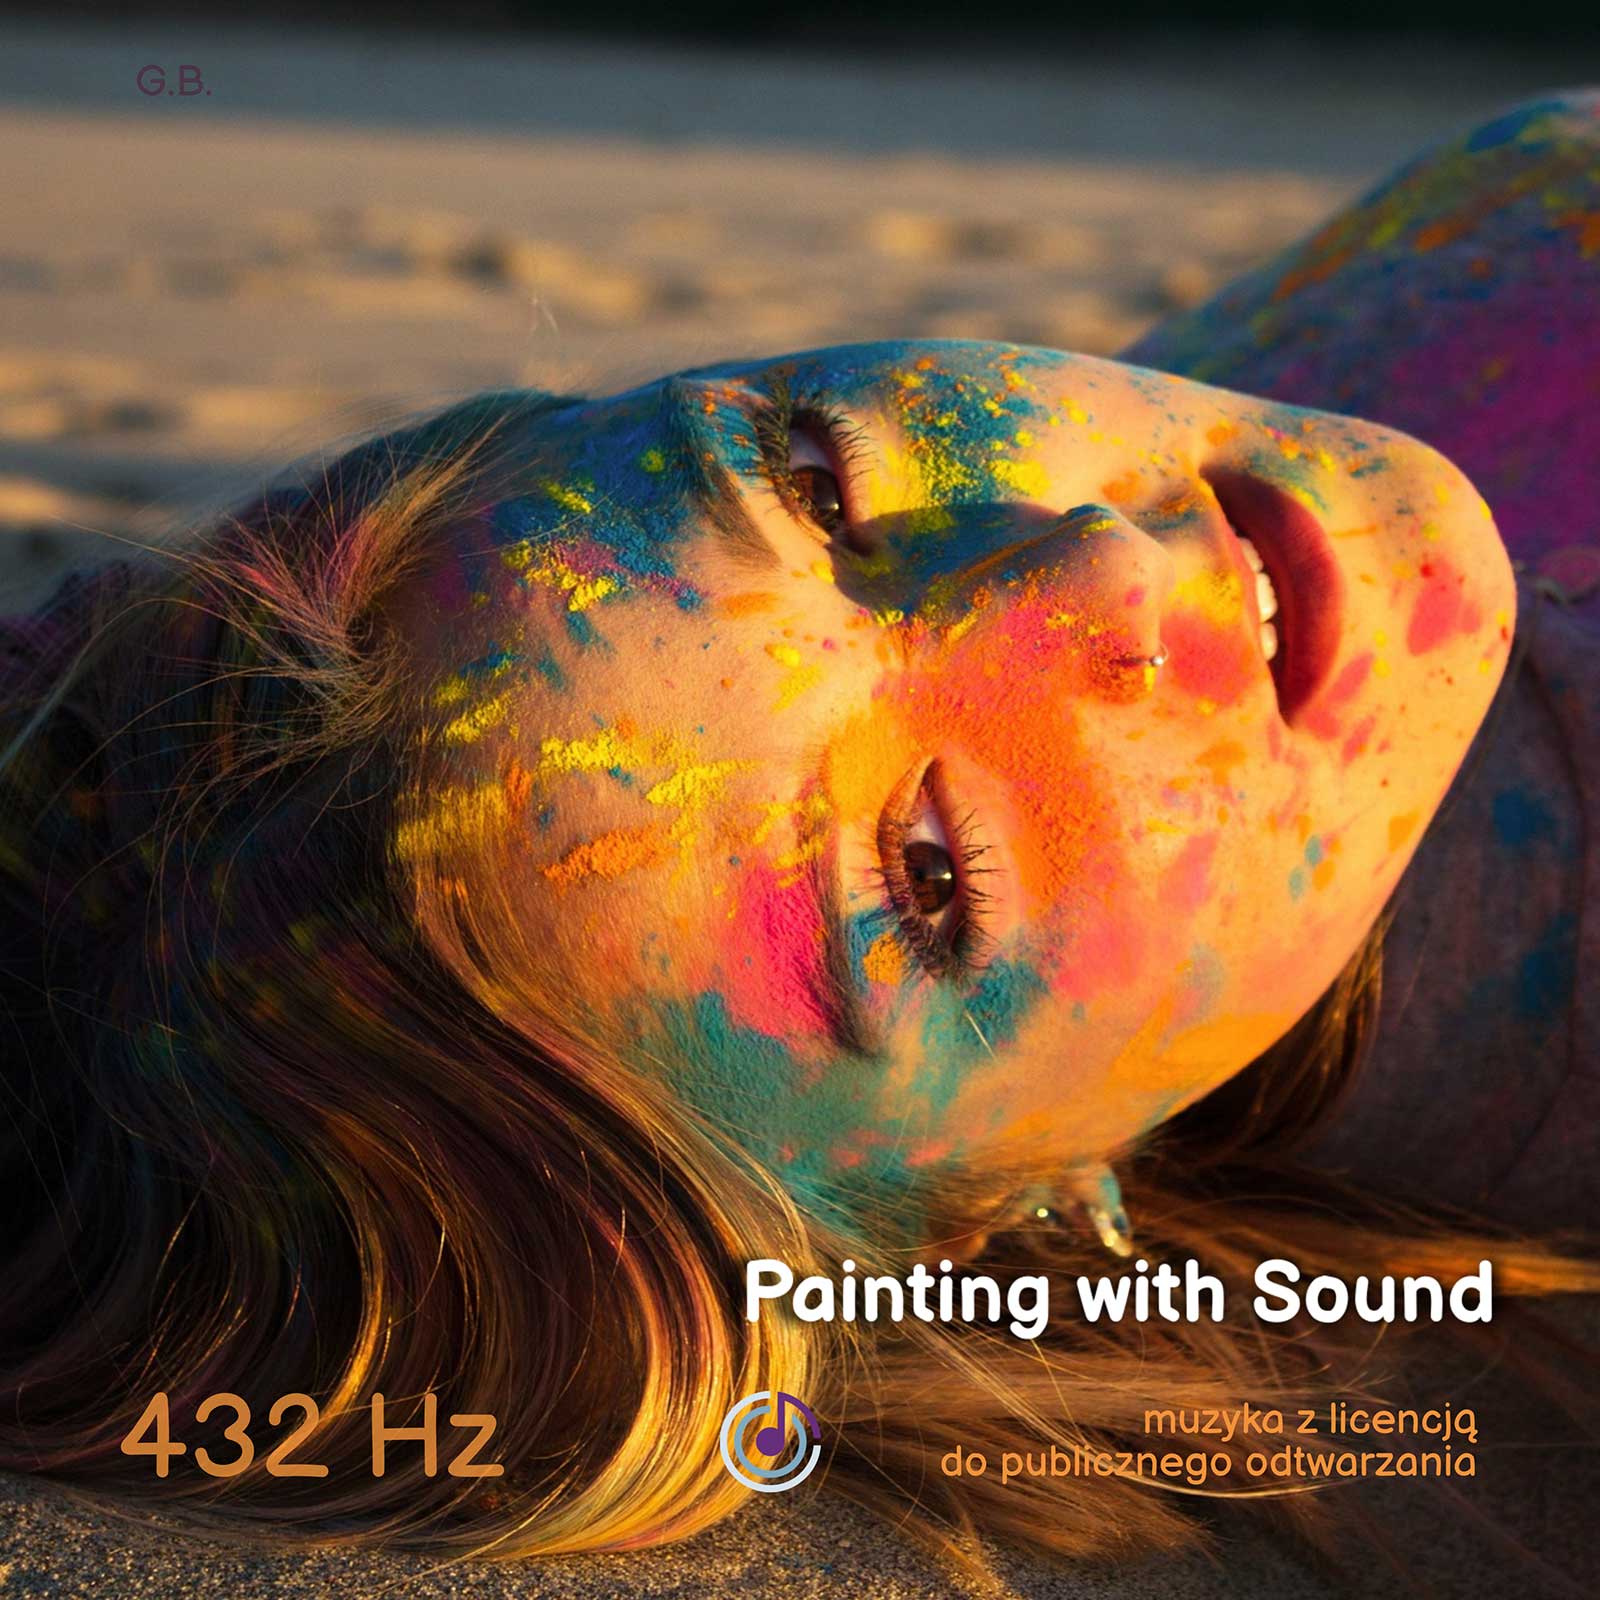 Painting with Sound